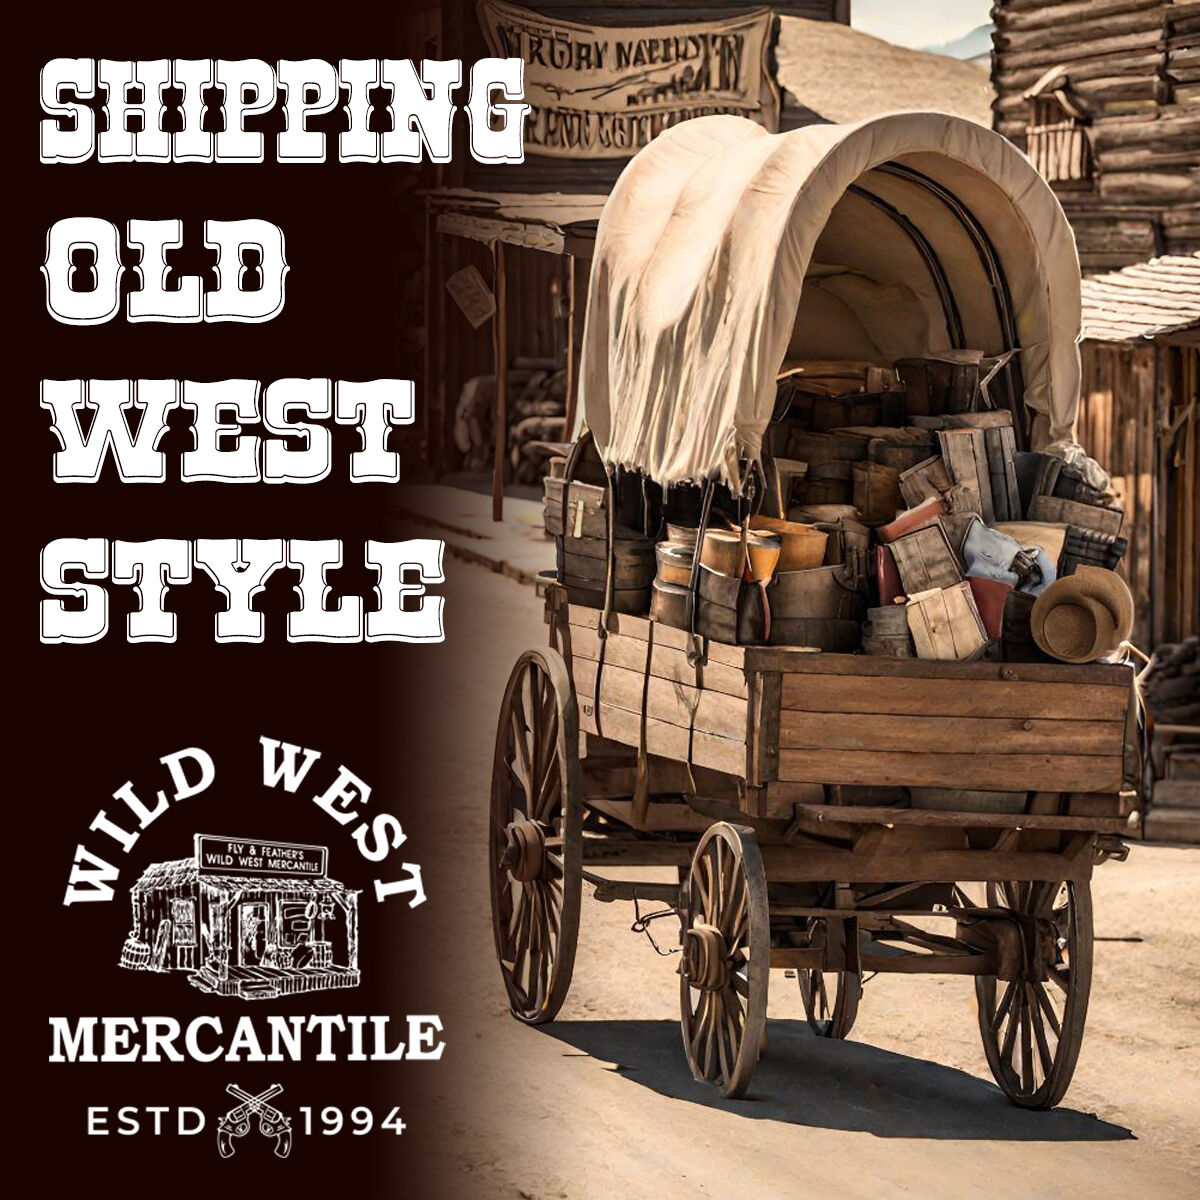 Whether it's by truck, plane, train, or wagon get it shipped for FREE🤠 All US Orders Over $50 get Free Ground Shipping. International customers get 50% Off All Shipping Costs🤠
Shop Now: bit.ly/4a8eDZ8
#wildwestmercantile #freeshipping #westernwear #1880s #westernstore